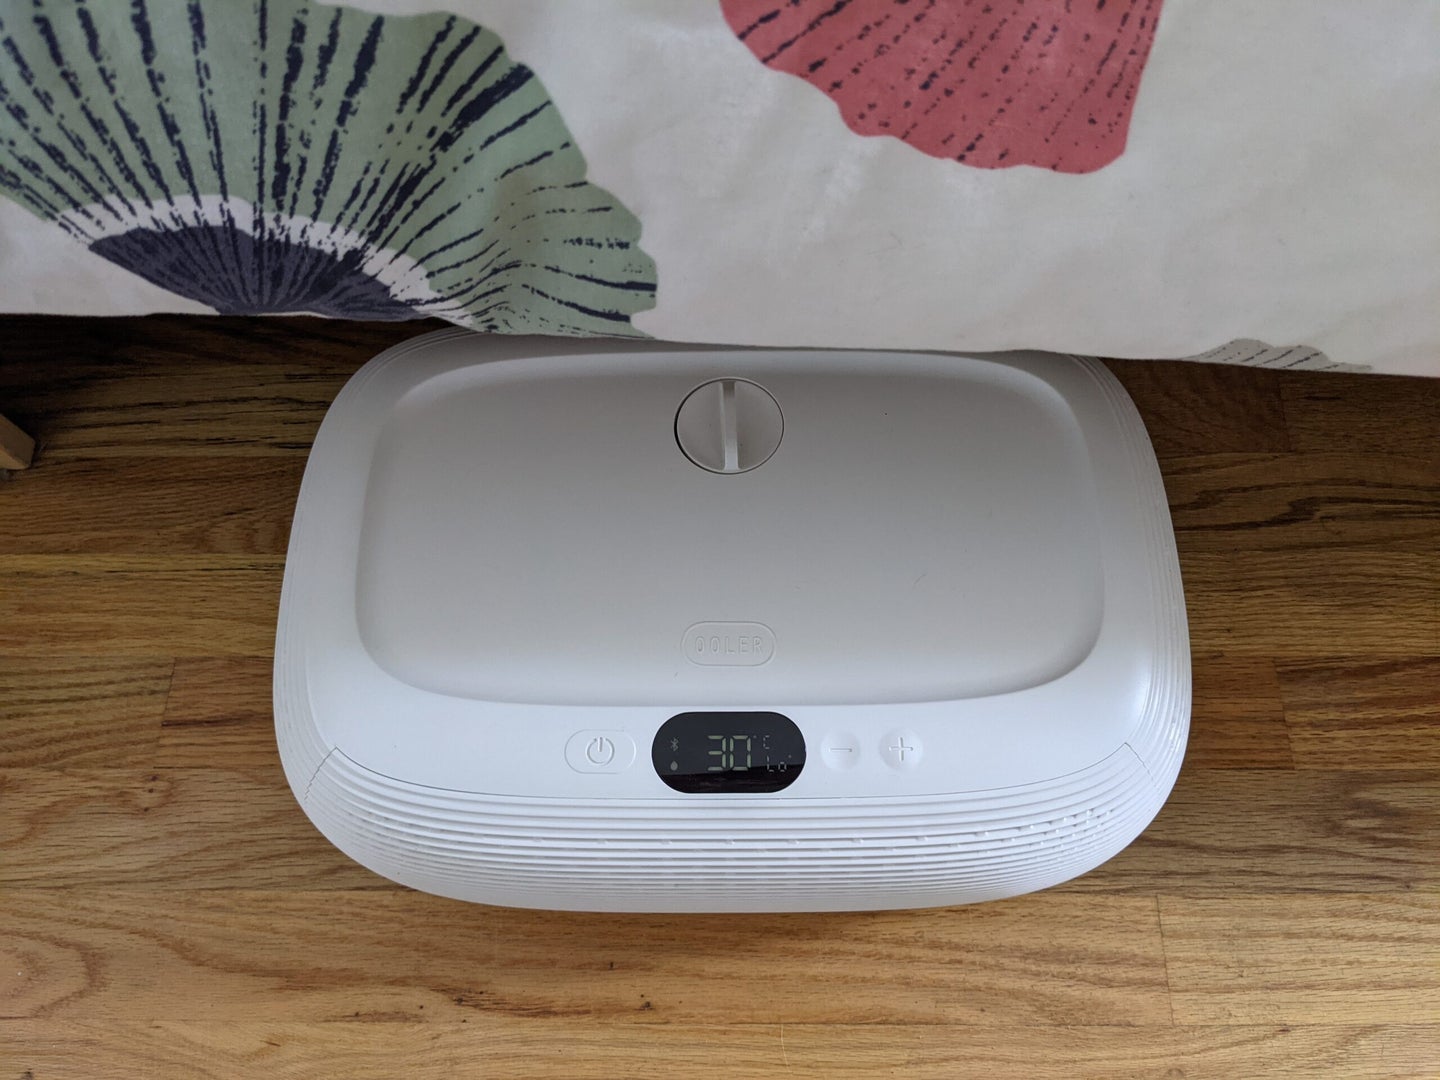 ooler referral - ChiliPad Review: Why the Ooler Sleep System is Worth It -